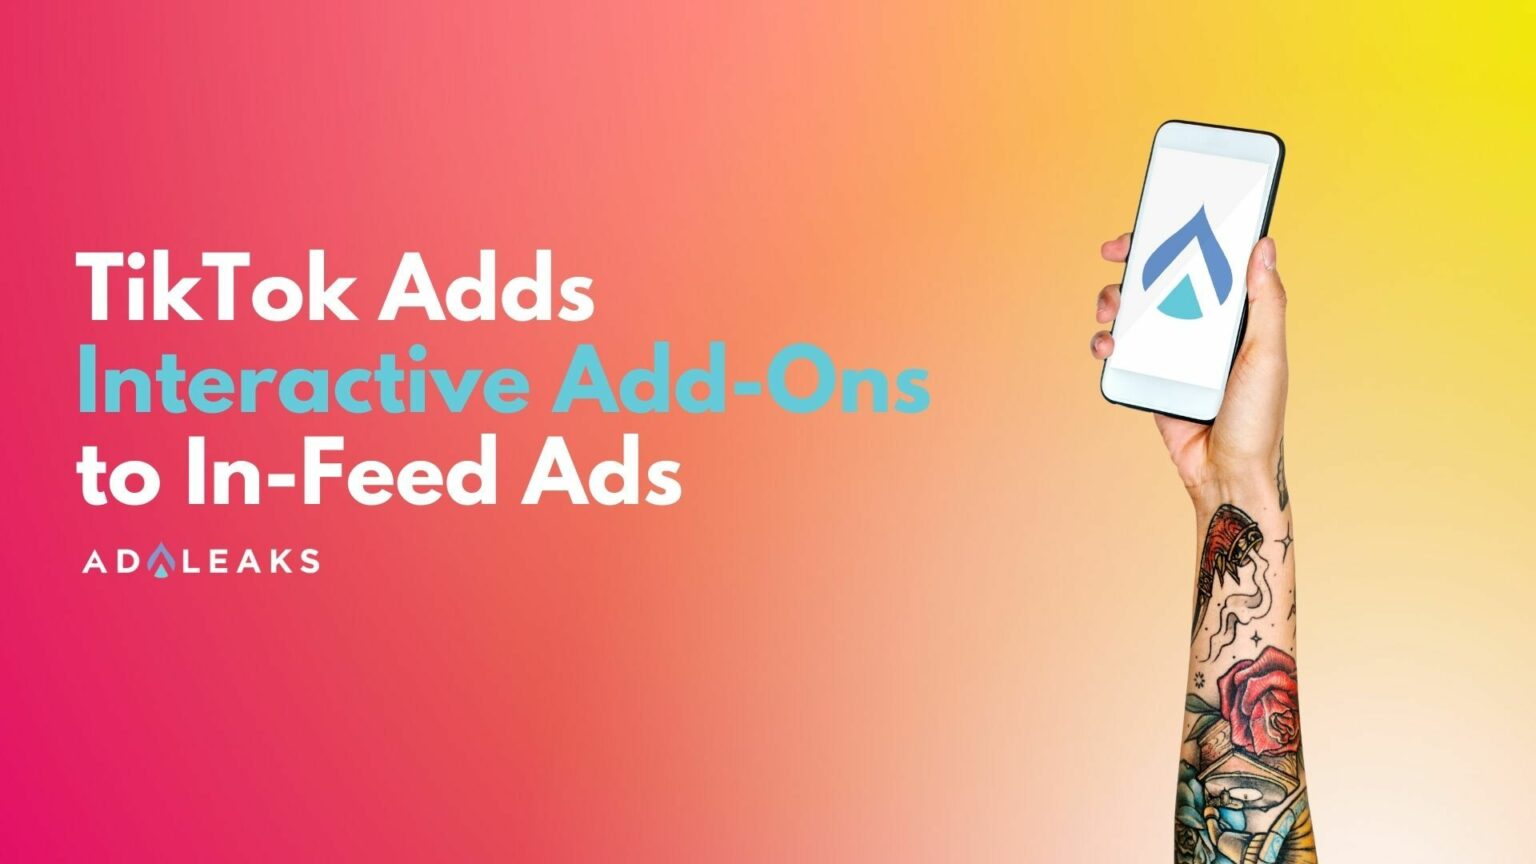 TikTok Adds Interactive Add-Ons to In-Feed Ads